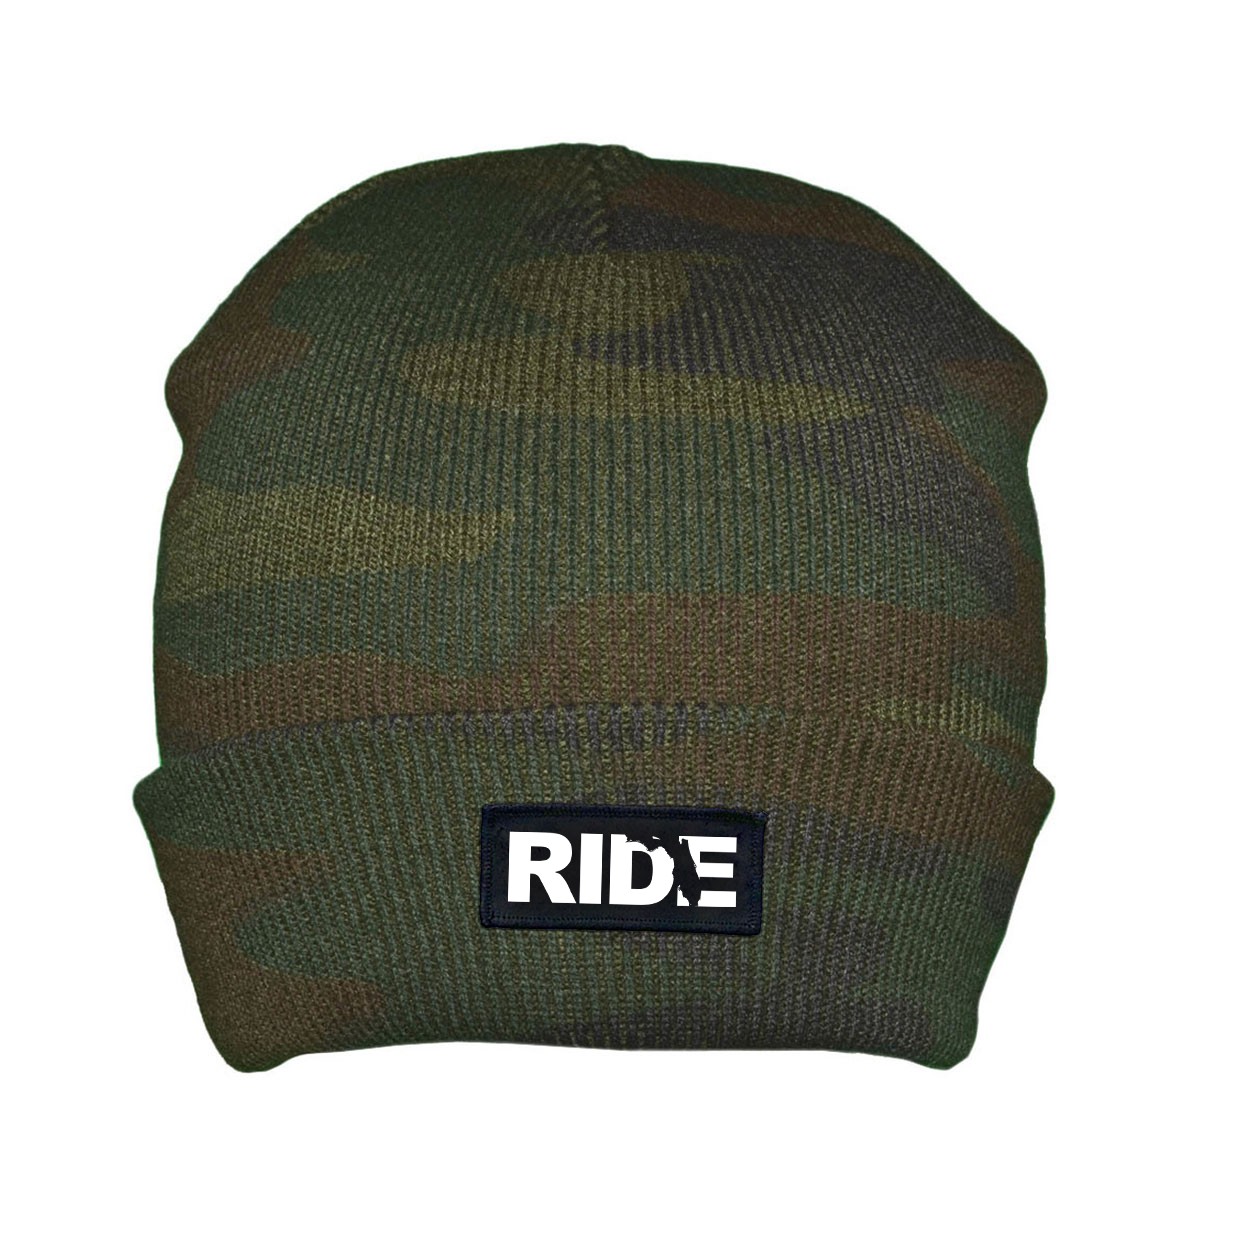 Ride Florida Night Out Woven Patch Roll Up Skully Beanie Camo (White Logo)